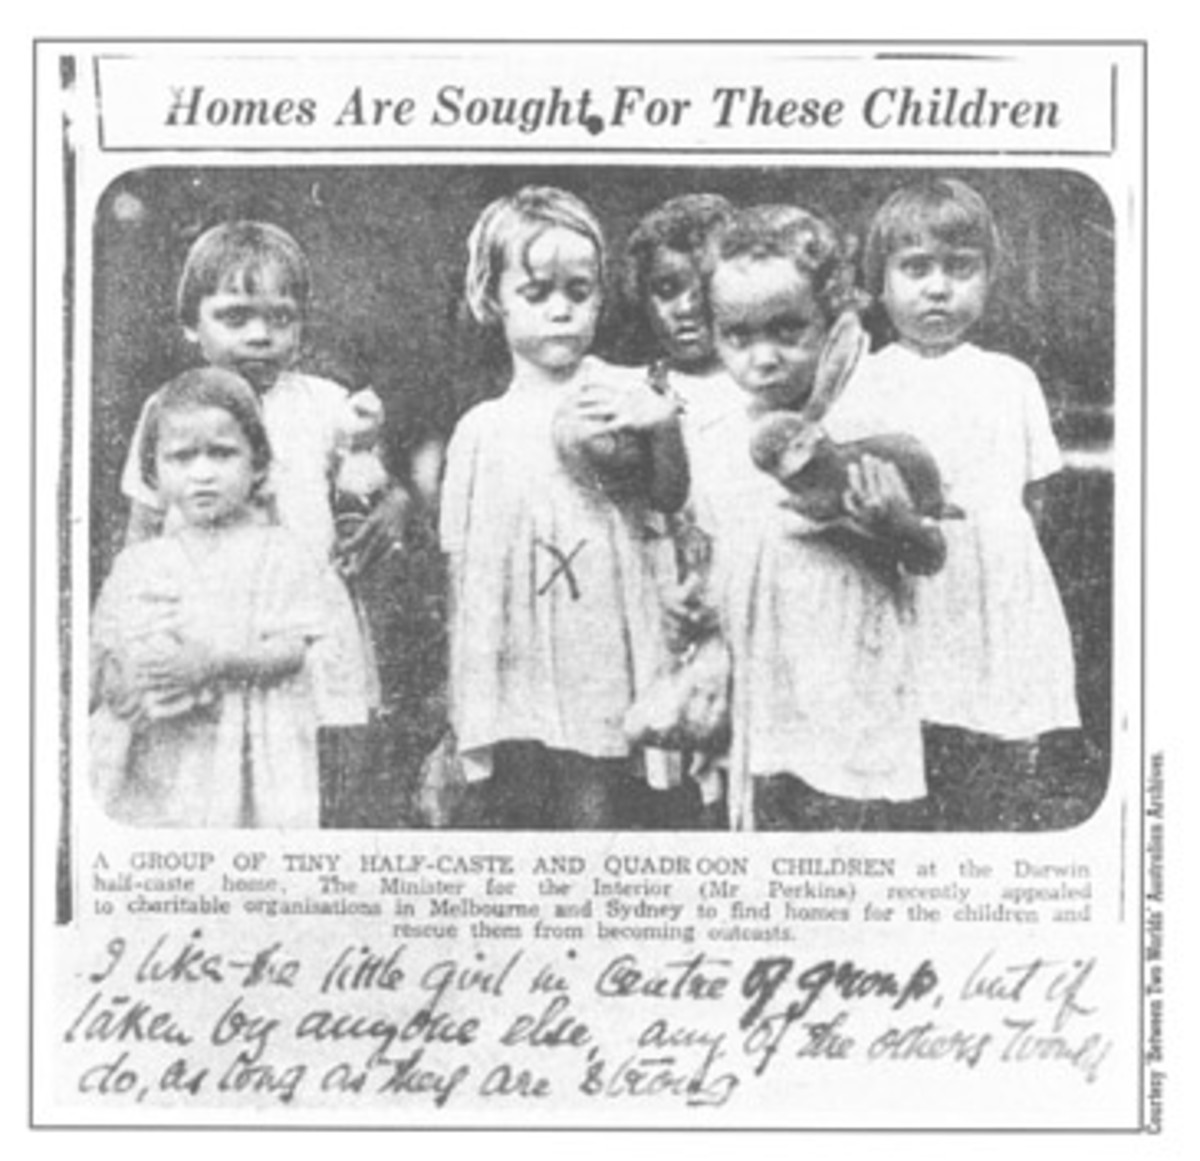 The Children Were Sent To Government Housing Or Sold Or Adopted To Work For European Families